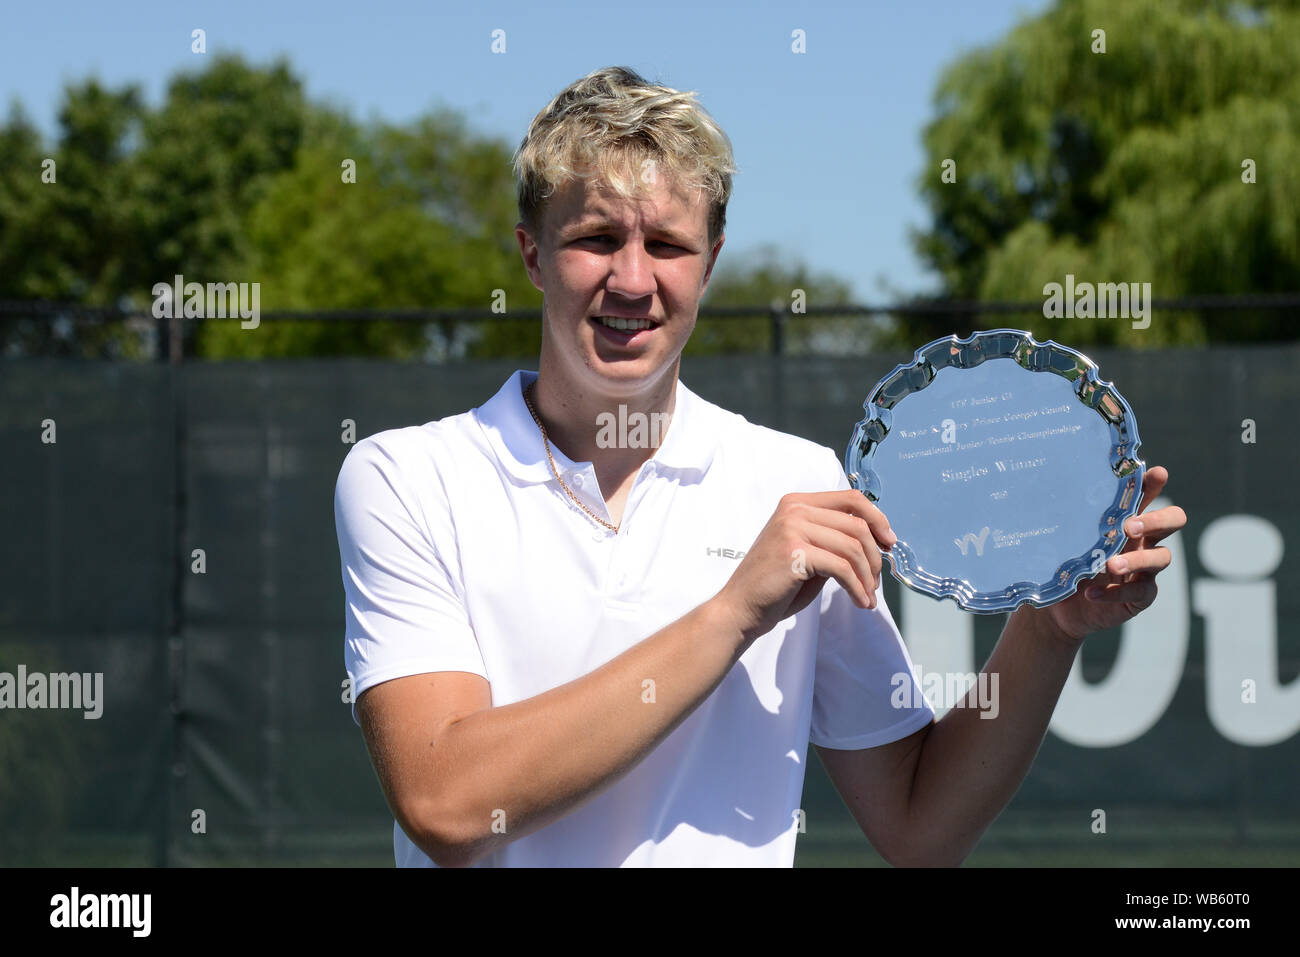 College Park, Maryland, USA. 24th Aug, 2019. Karlis Ozolins of Latvia with  his trophy after winning the Wayne K. Curry Prince George's County  International Junior Tennis Championships in College Park Maryland. Credit: